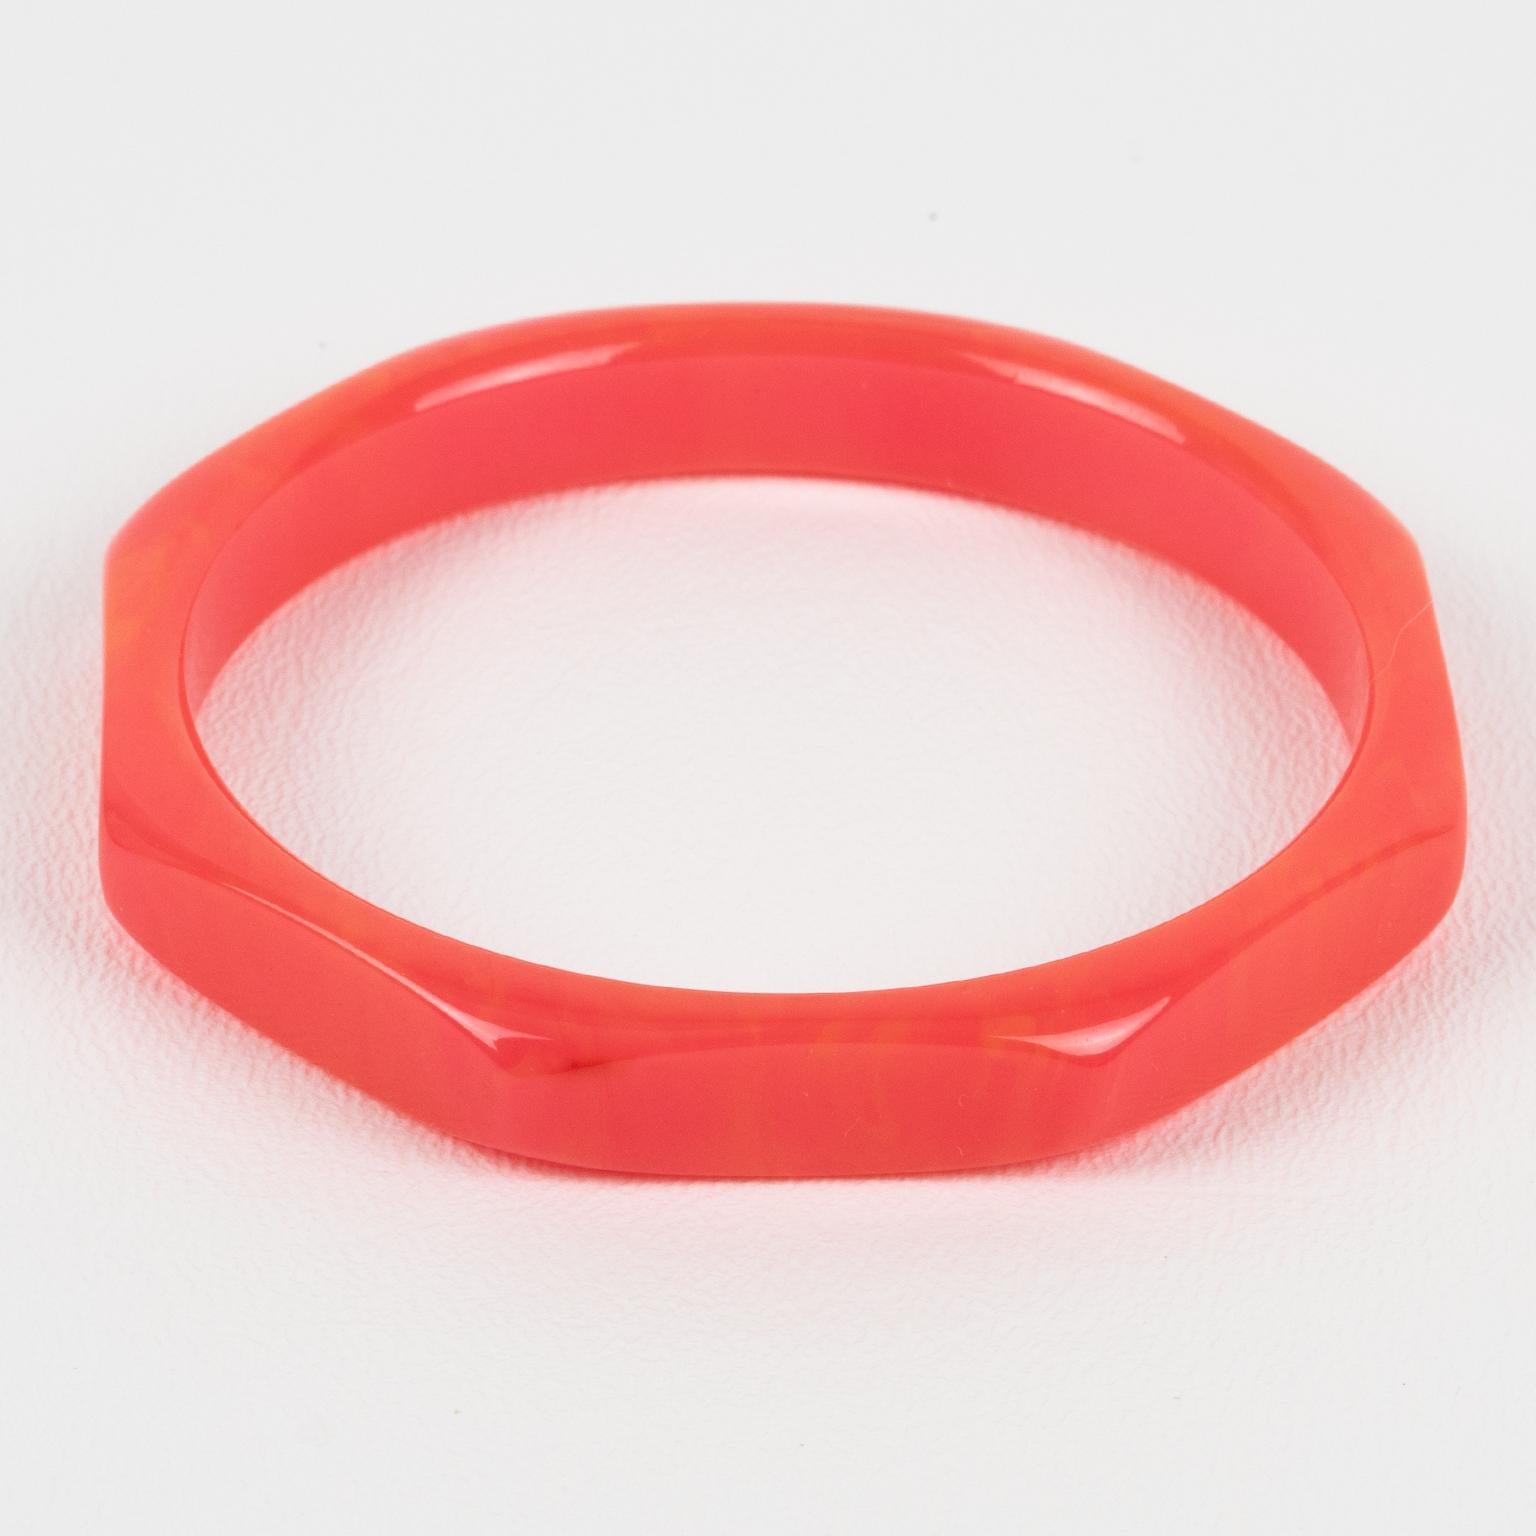 This gorgeous pink marble Bakelite bracelet bangle has a chunky octagonal spacer shape with deeply faceted and carved designs all around. It features an intense pink marble color with orange swirling, also called tequila sunrise color.
Measurements: